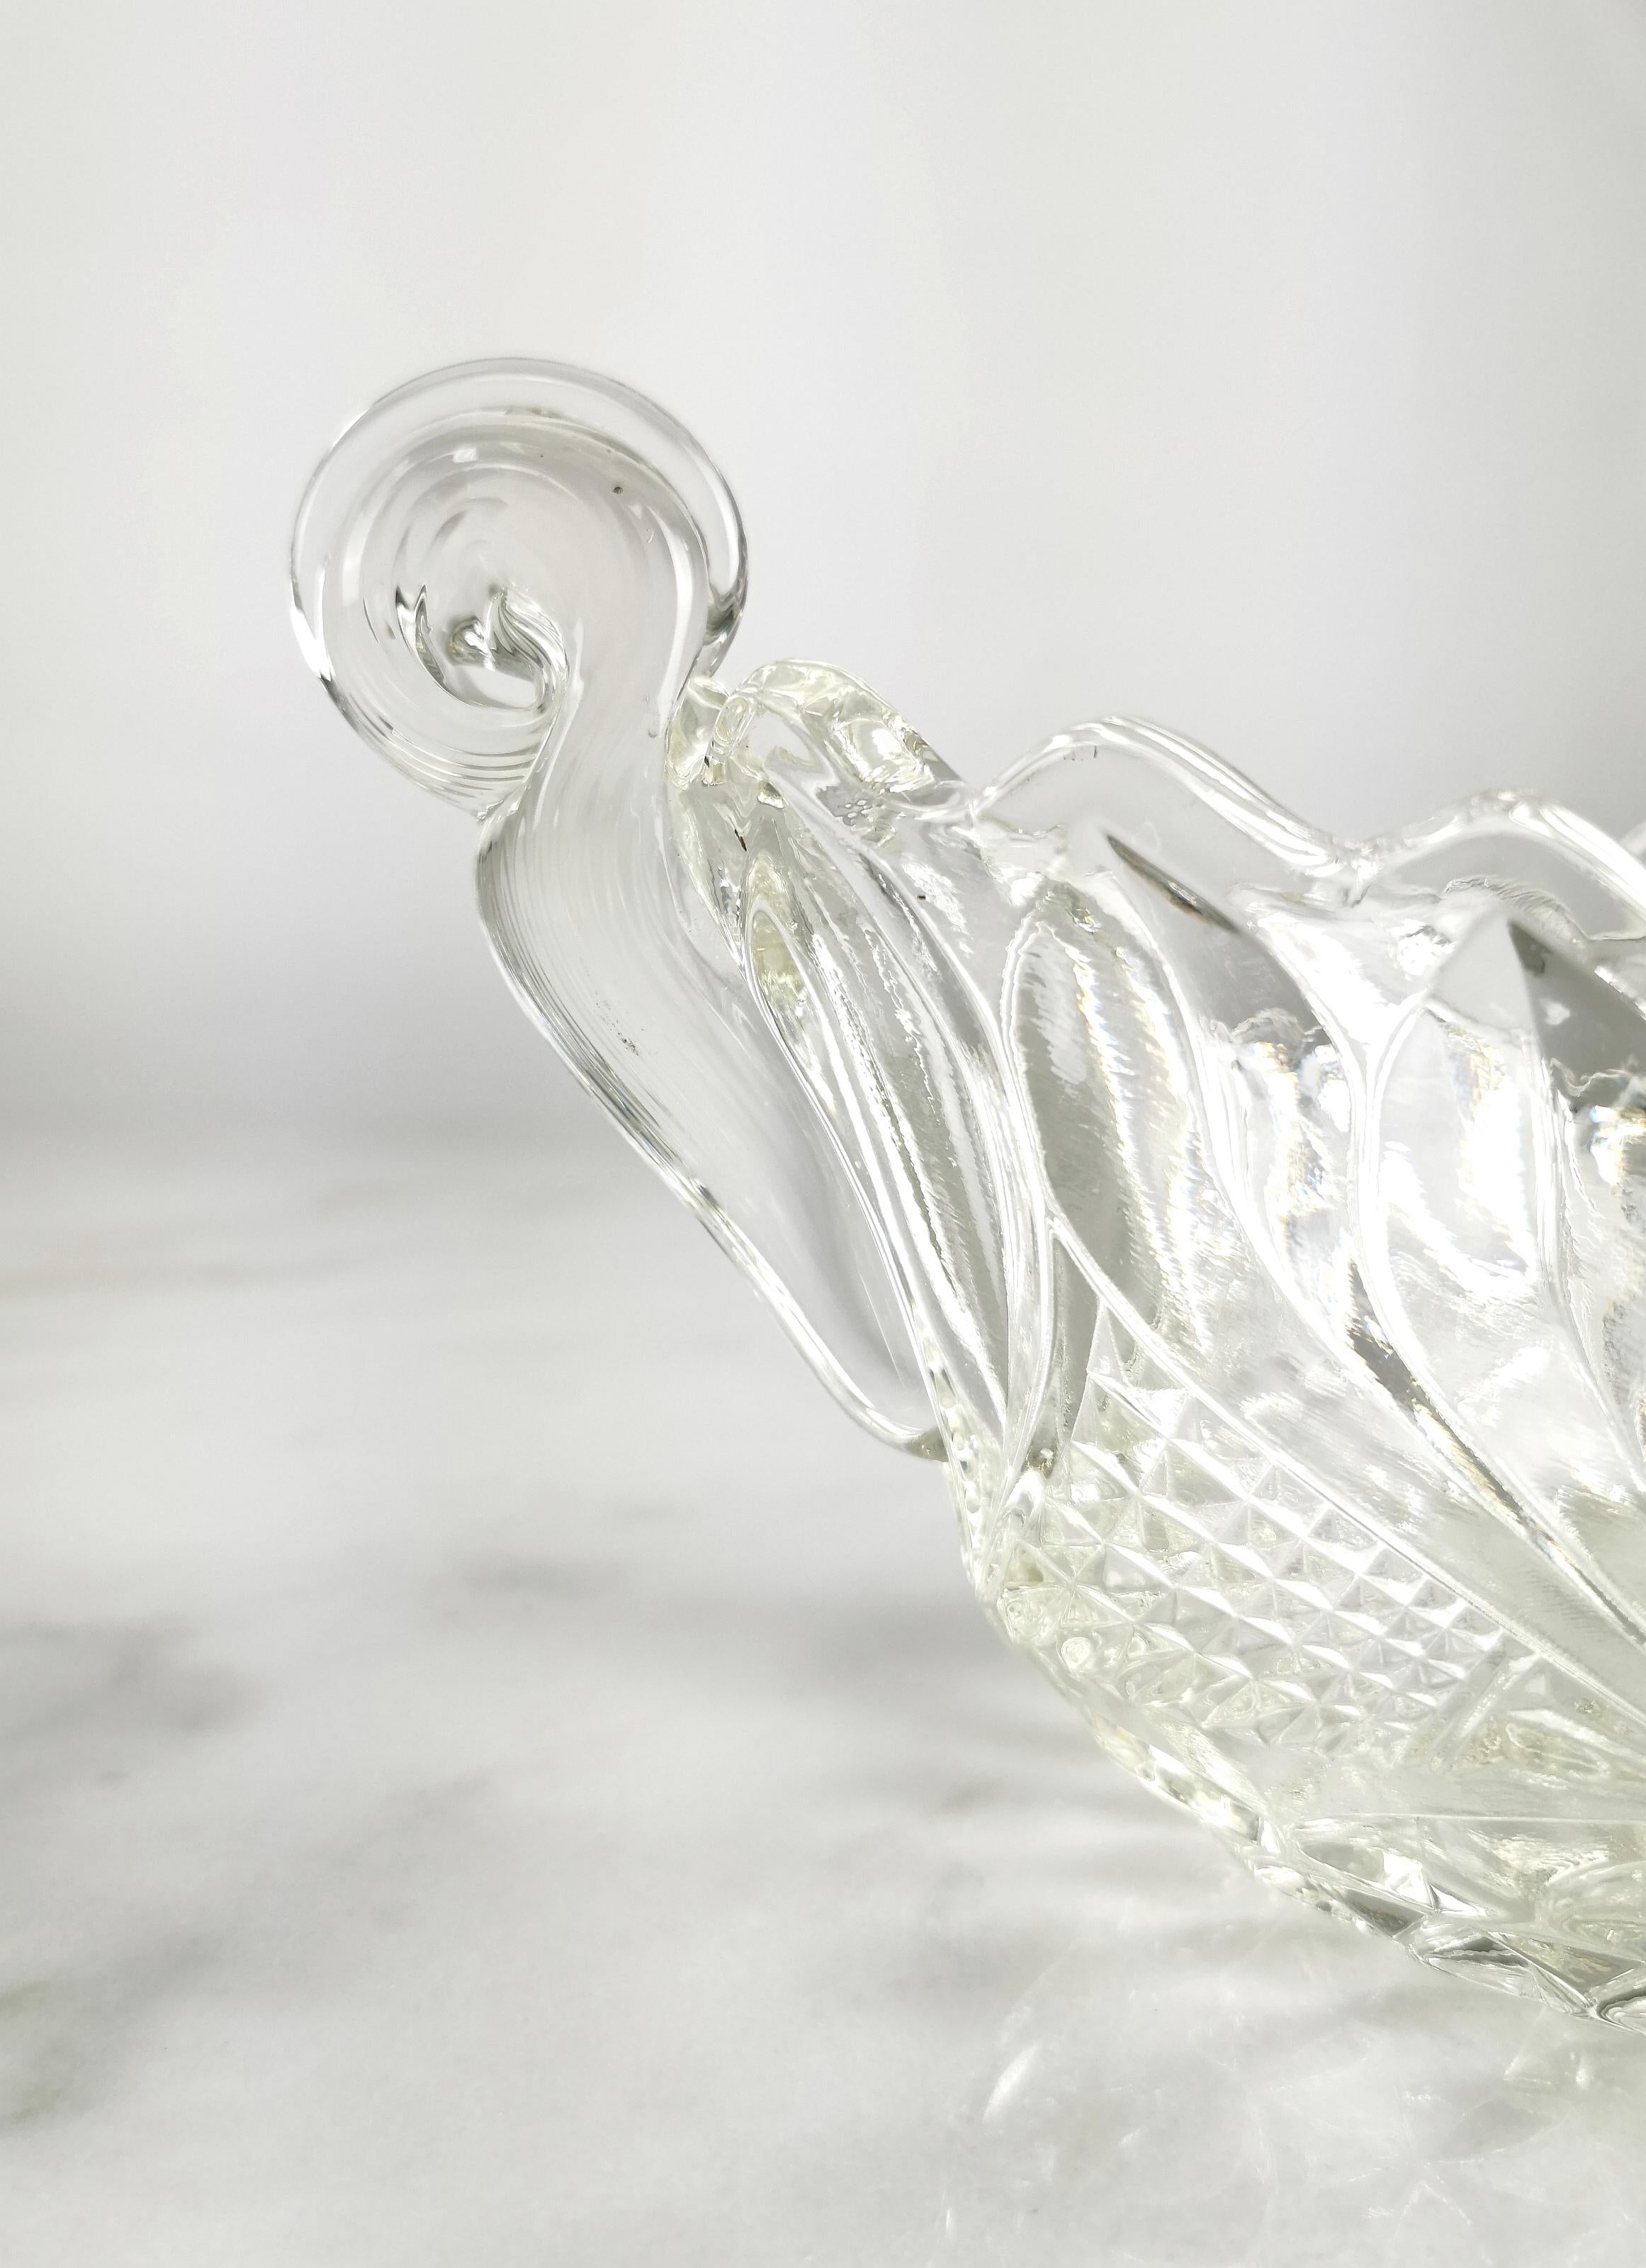 Centerpiece Carved Crystal Glass Transparent Mid-Century Italian Design, 1950s For Sale 1